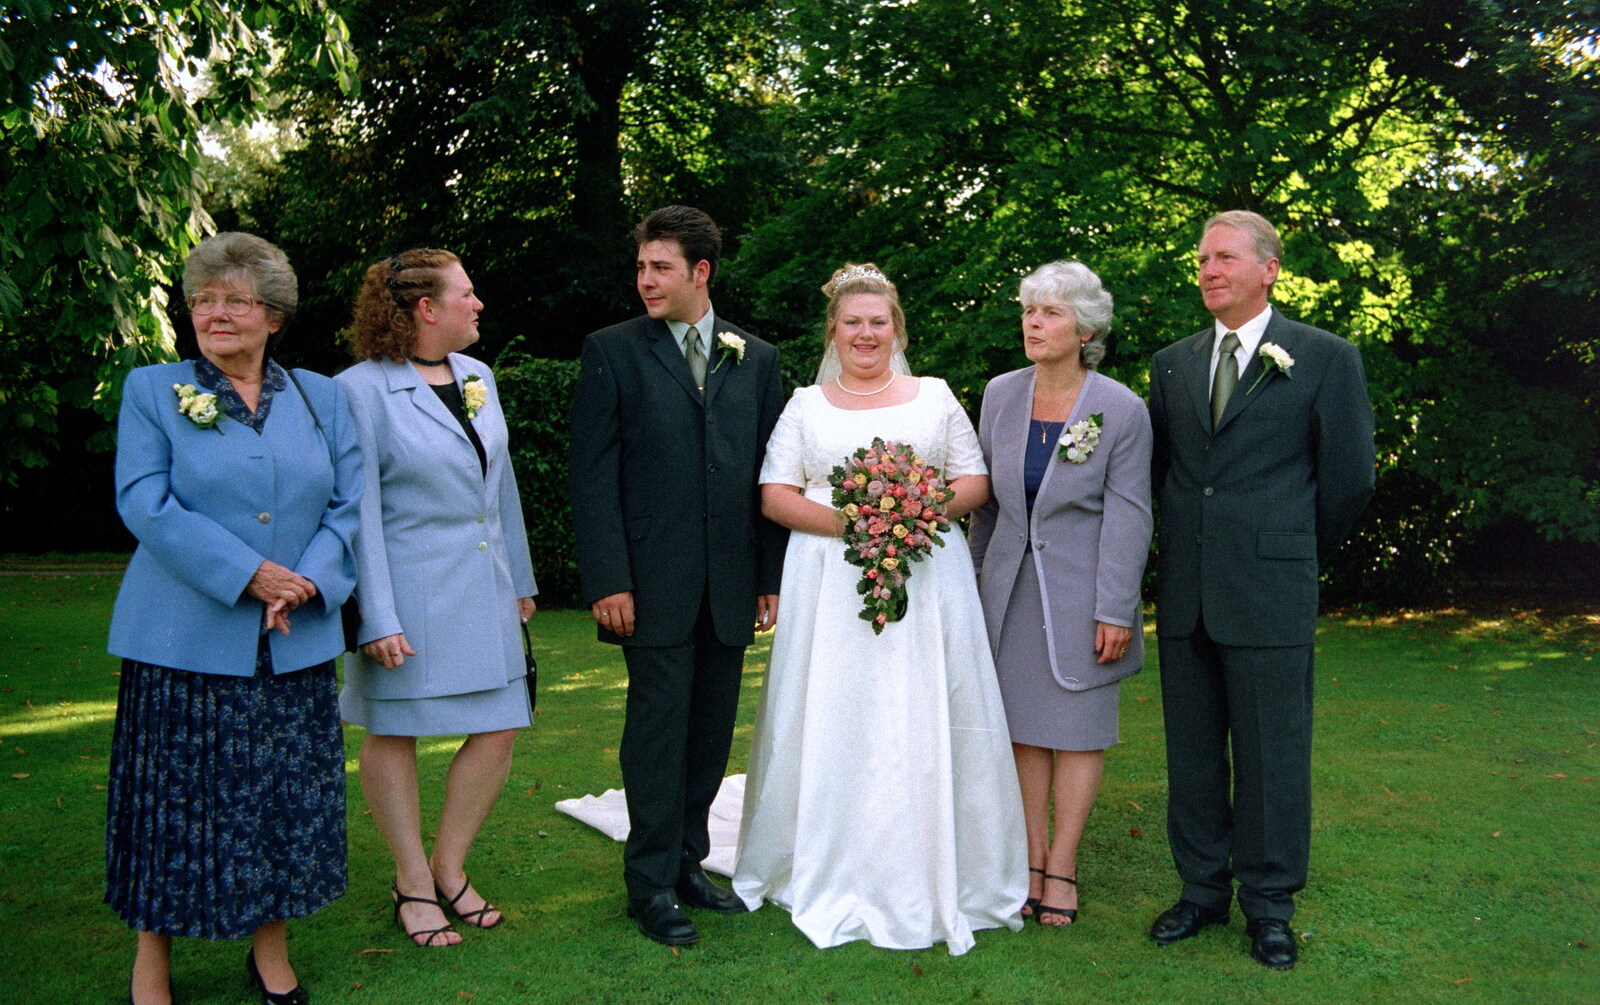 More group photo action from Helen and Neil's Wedding, The Oaksmere, Brome, Suffolk - 4th August 2000